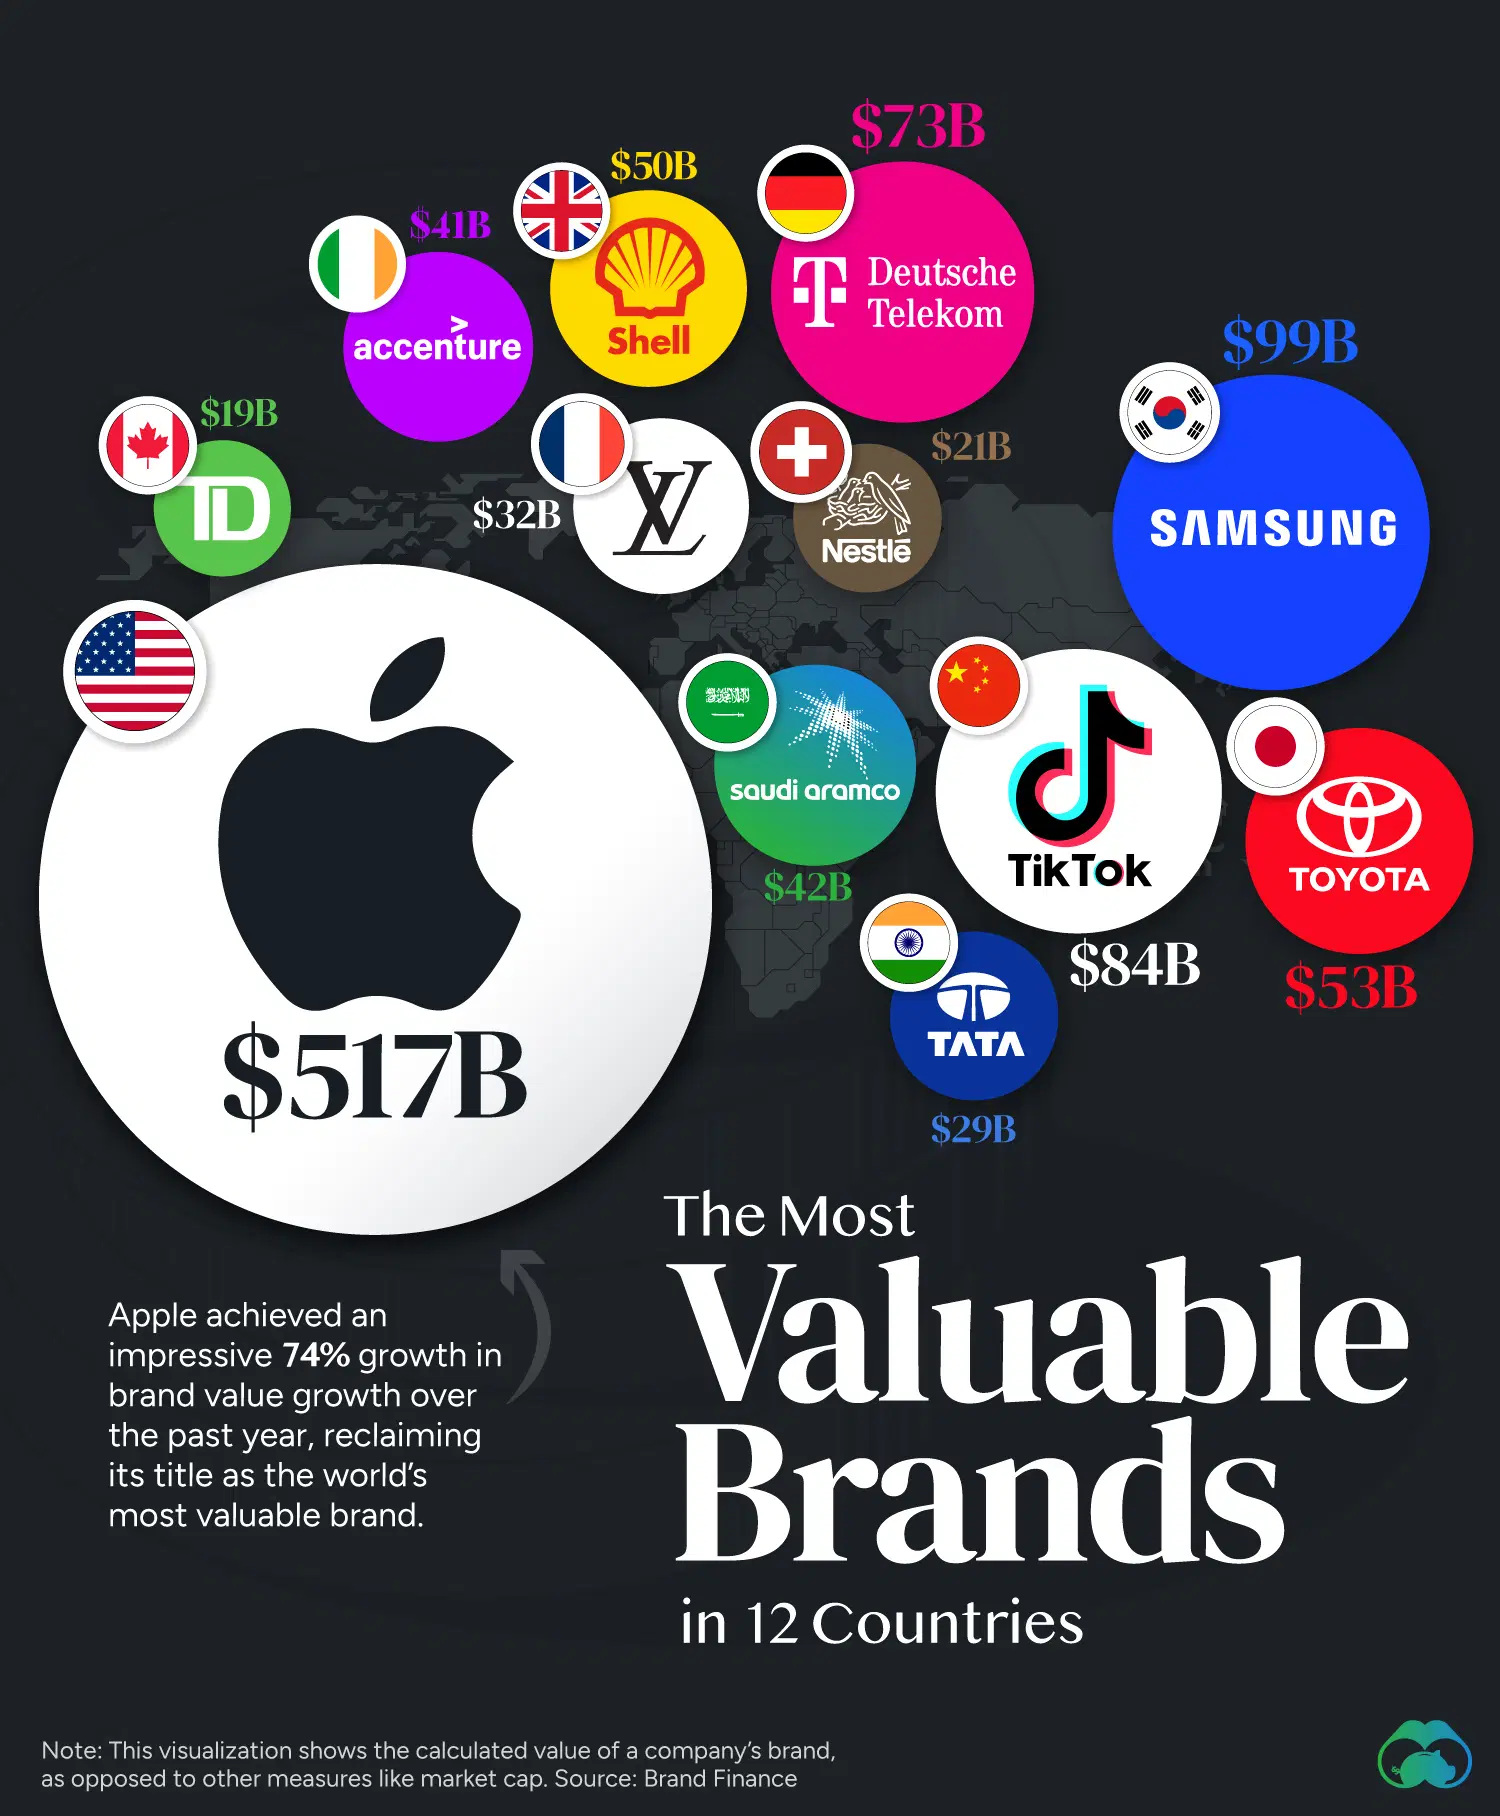 The Most Valuable Brands in 12 Countries